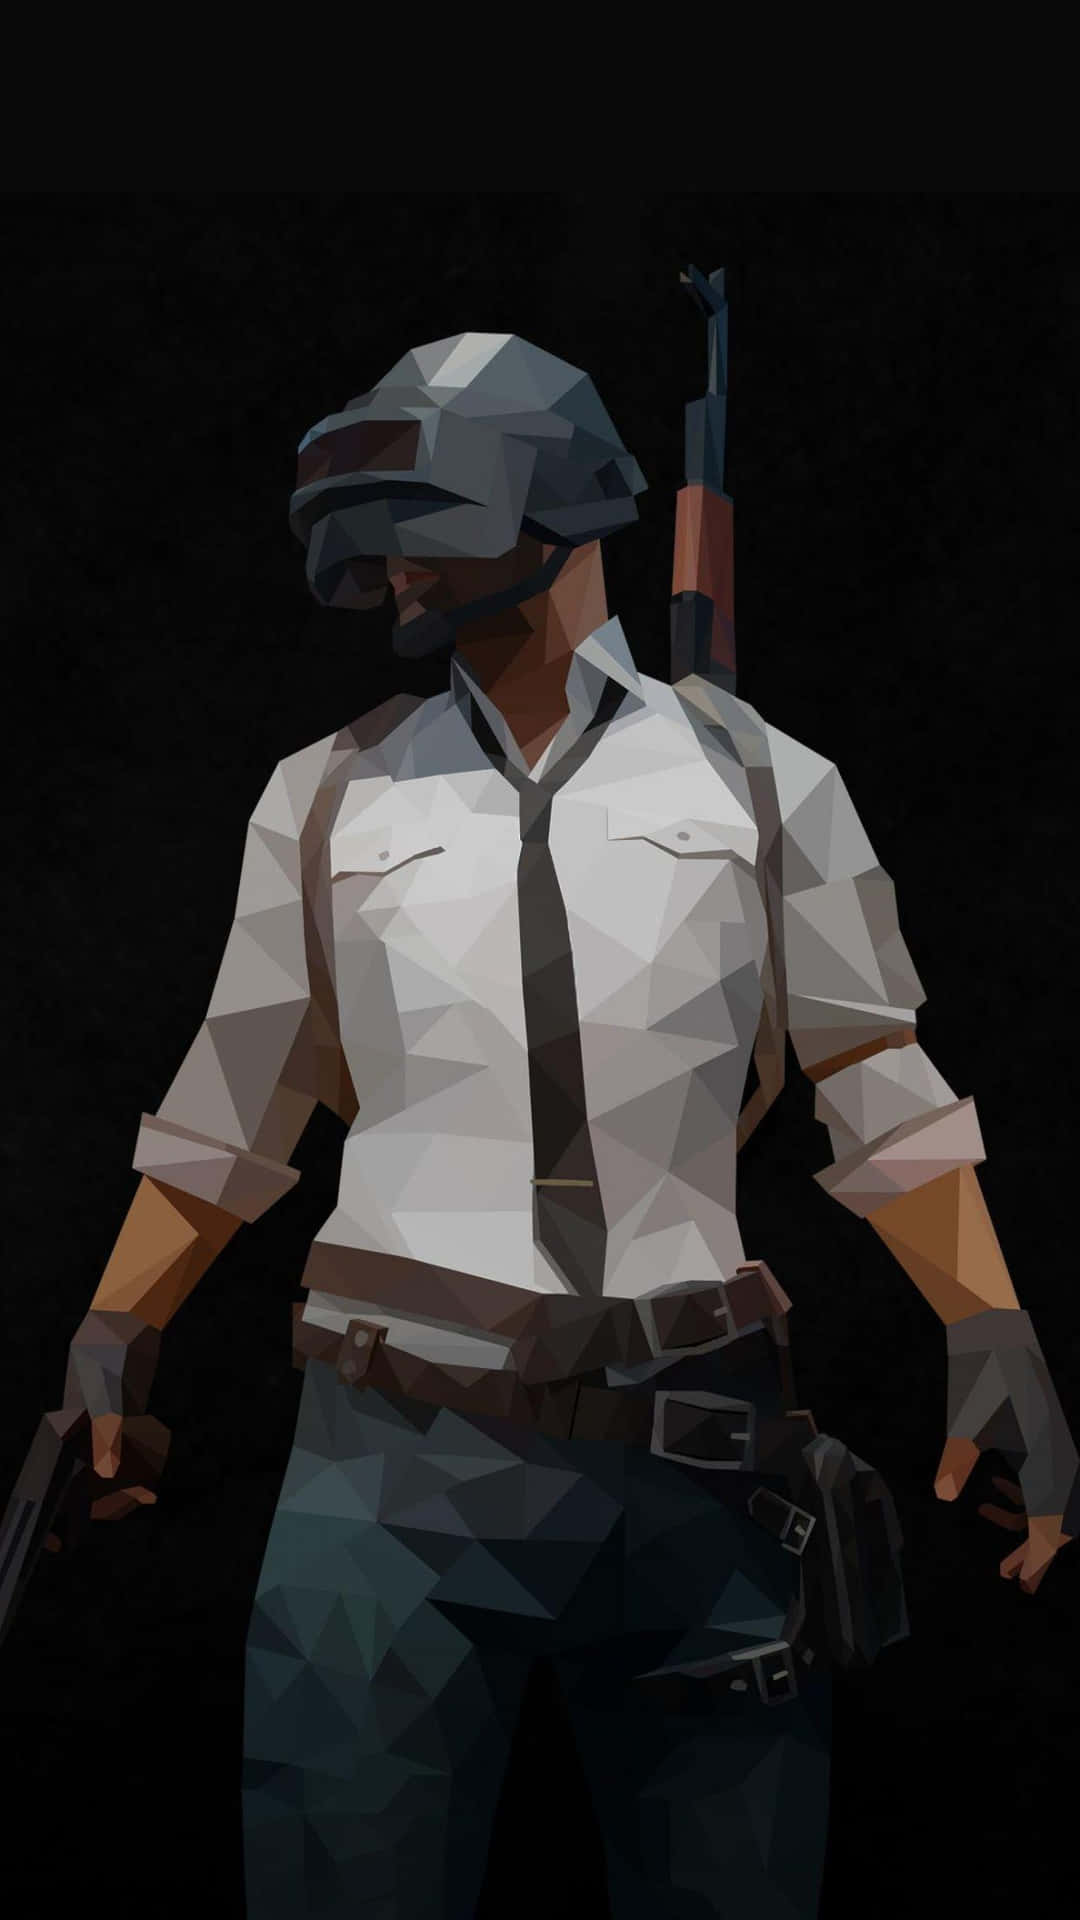 Polygon Art Of Male Character PUBG iPhone Wallpaper